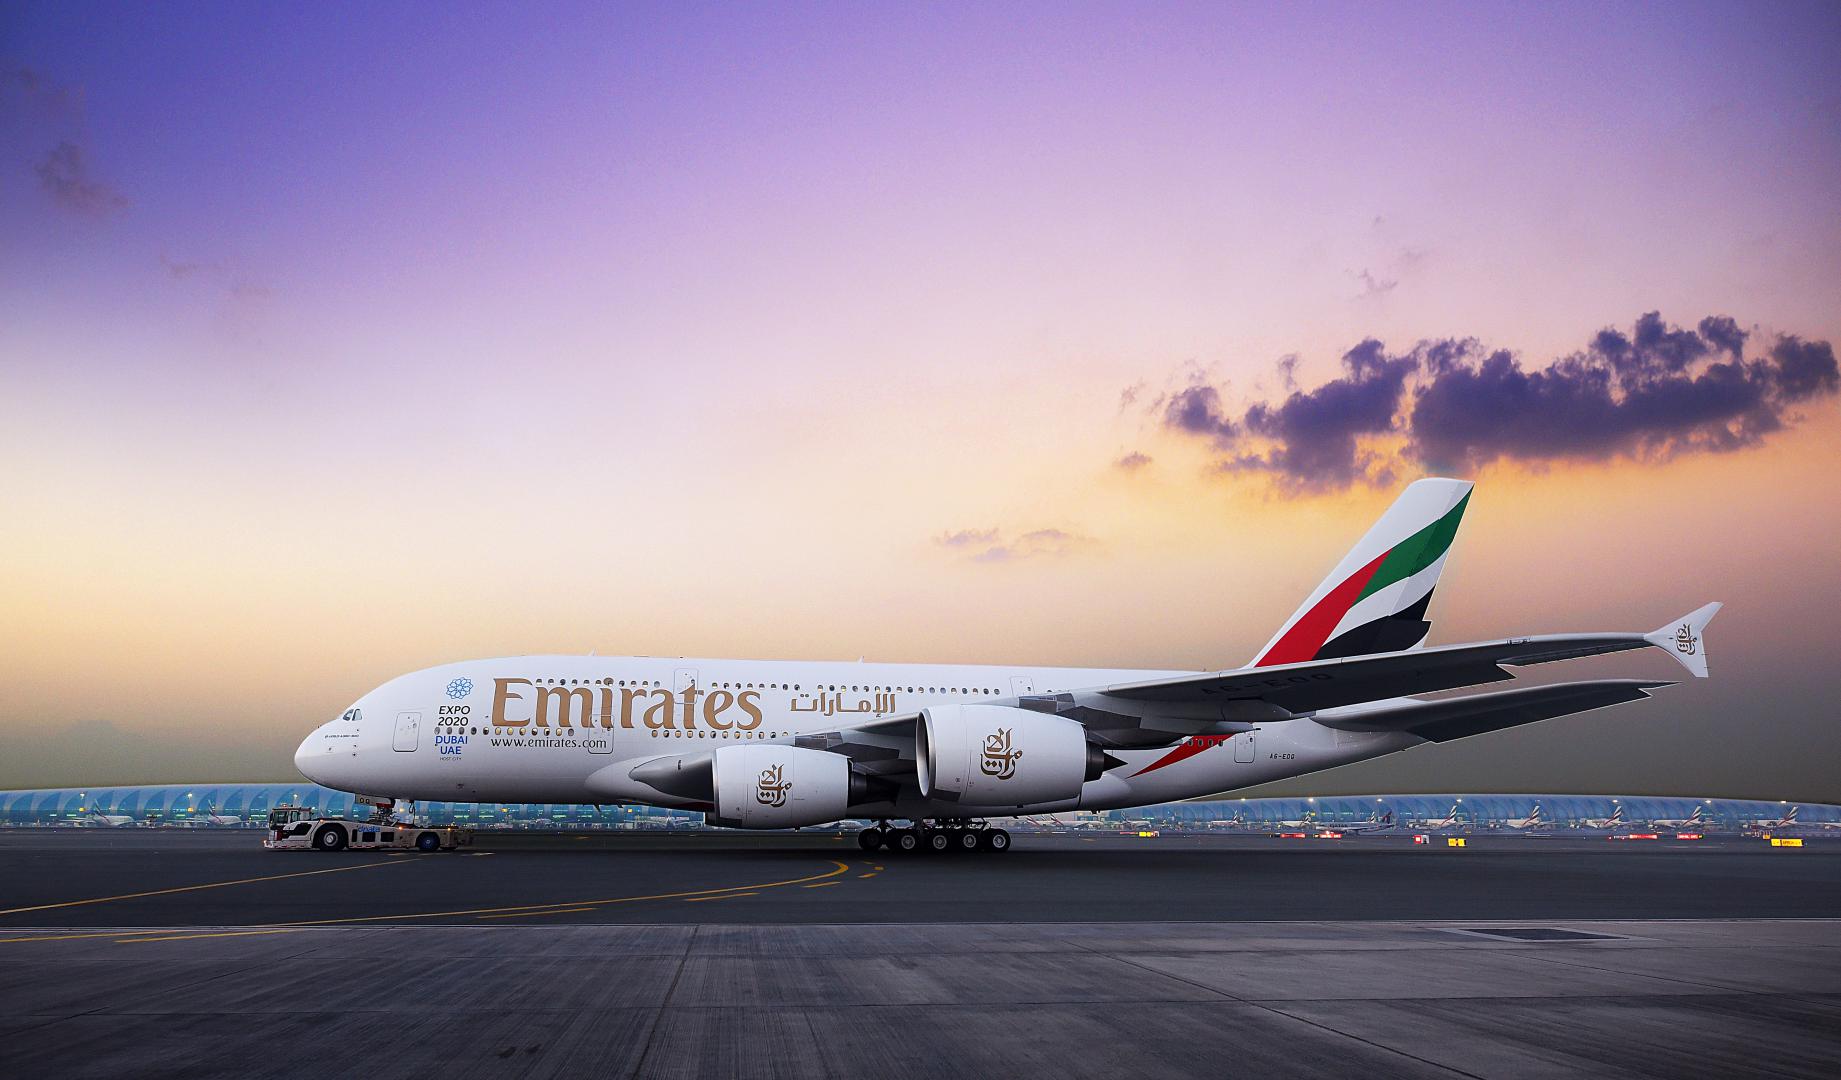 Emirates reports concern about last week's storms